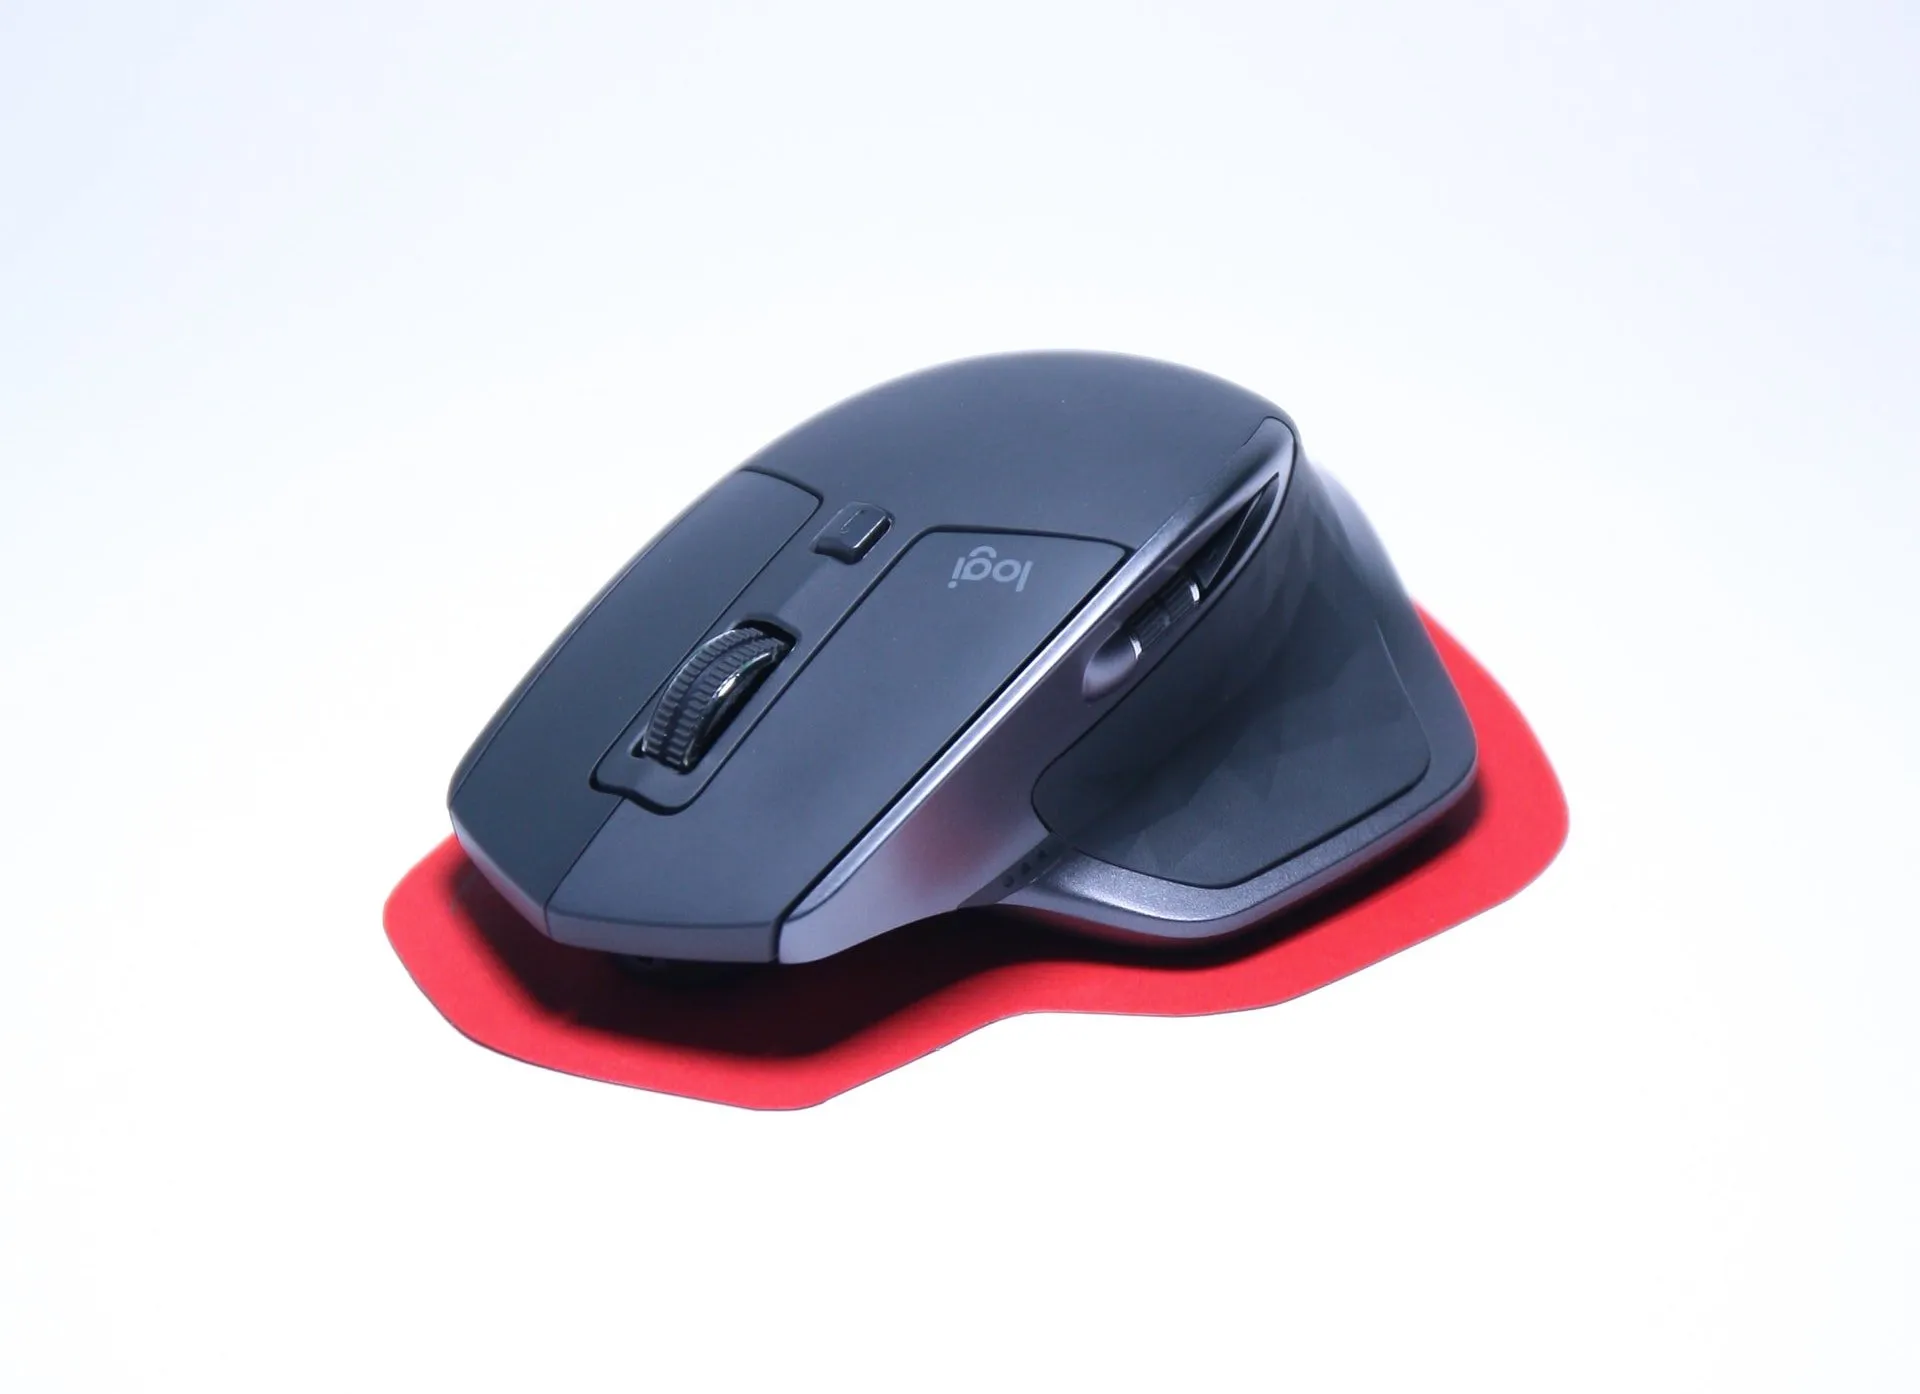 Best Mouse for Video Editing: Top 3 Picks